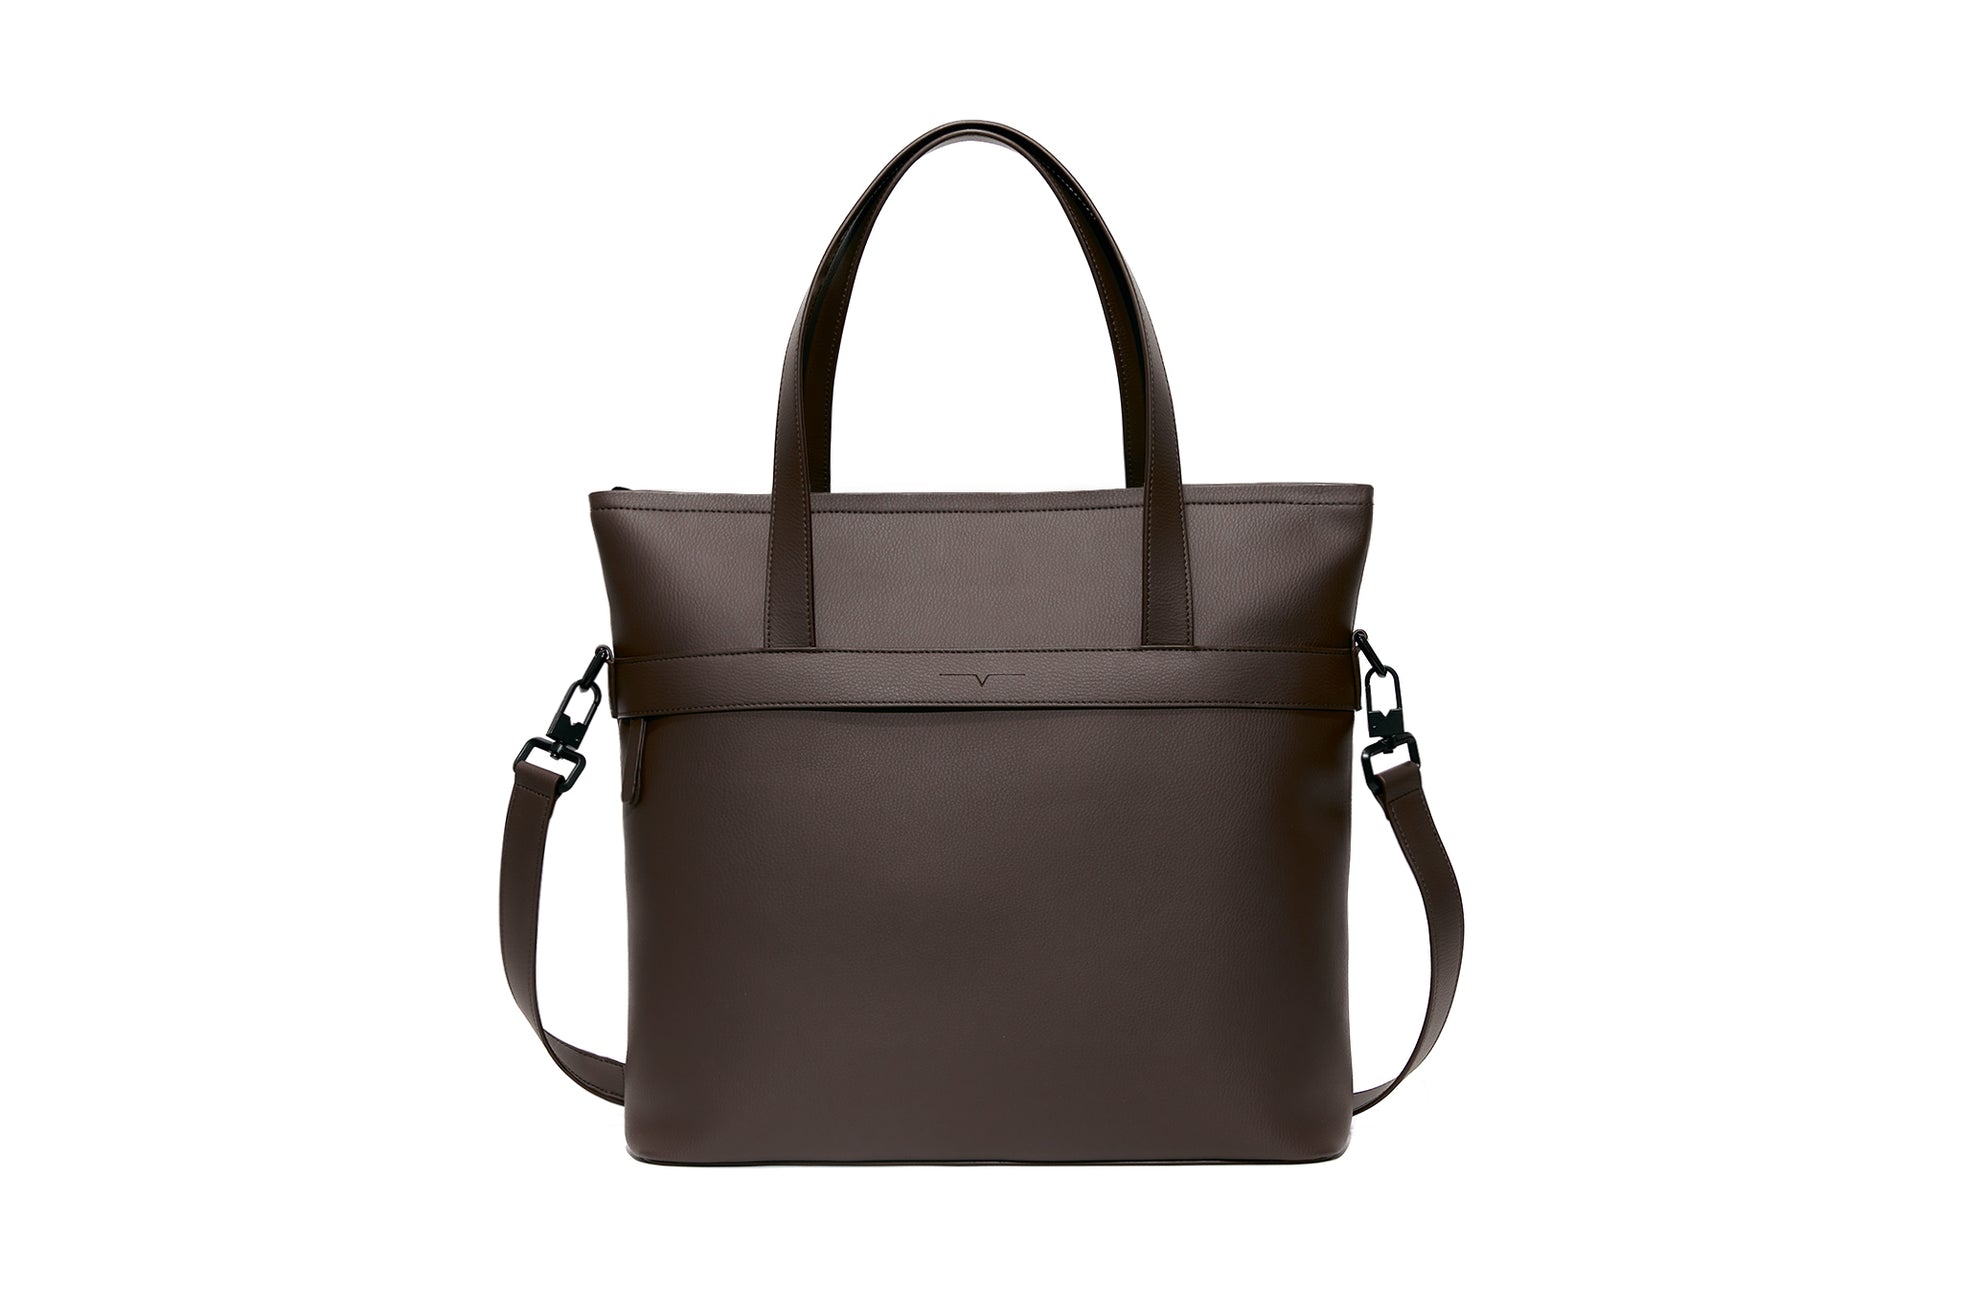 The Zipper Tote in Technik-Leather in Taupe image 1